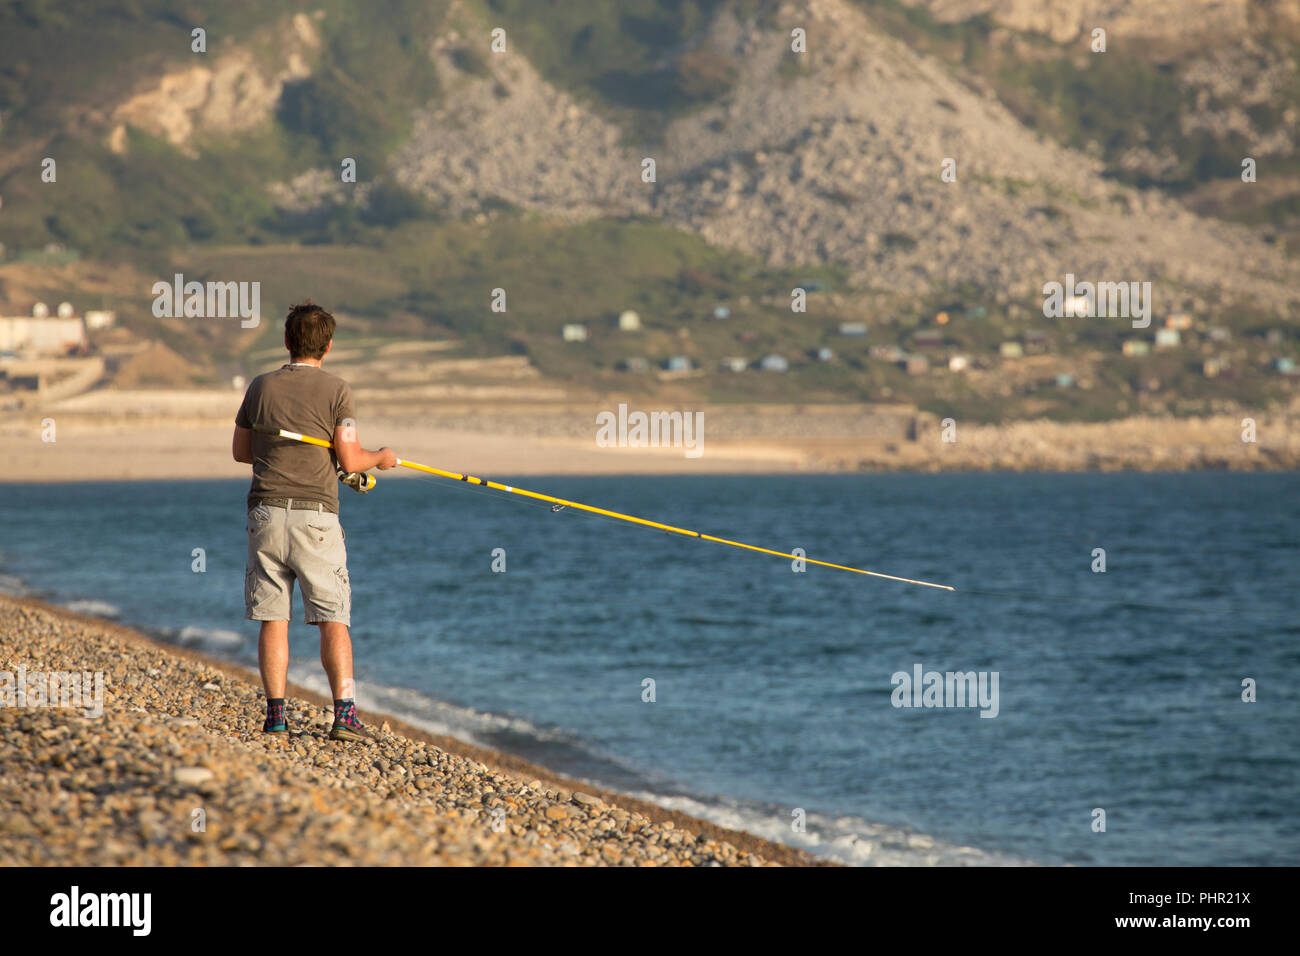 An angler fishing in the late afternoon for mackerel on Chesil beach against a backdrop of Chesil Cove and the cliffs of the Isle of Portland. Dorset  Stock Photo